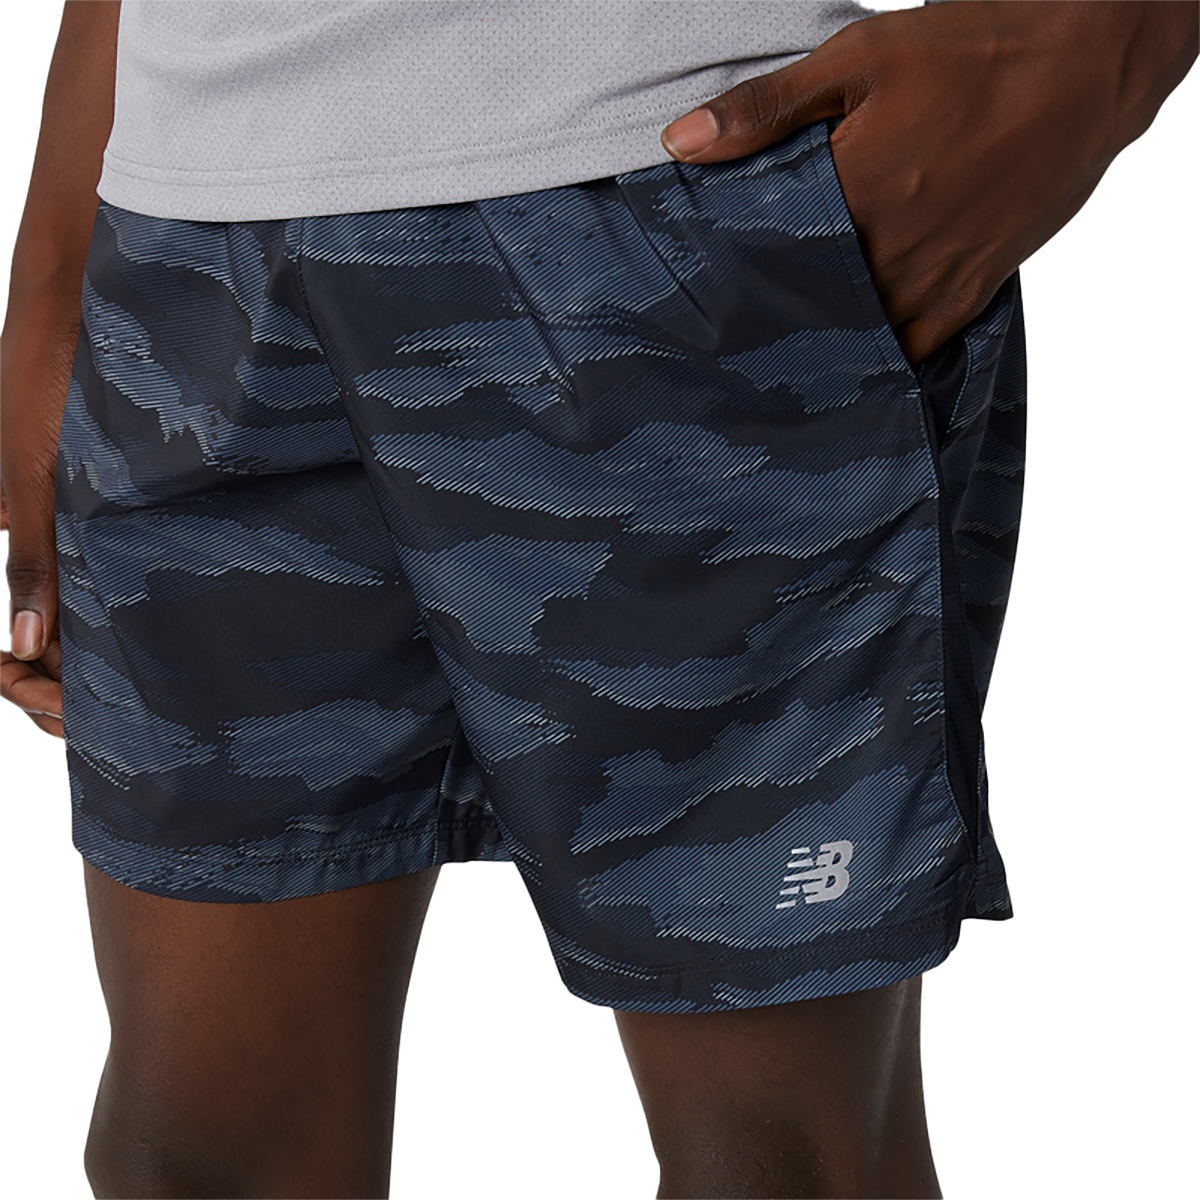 New Balance Printed Accelerate 7" Short, , large image number null